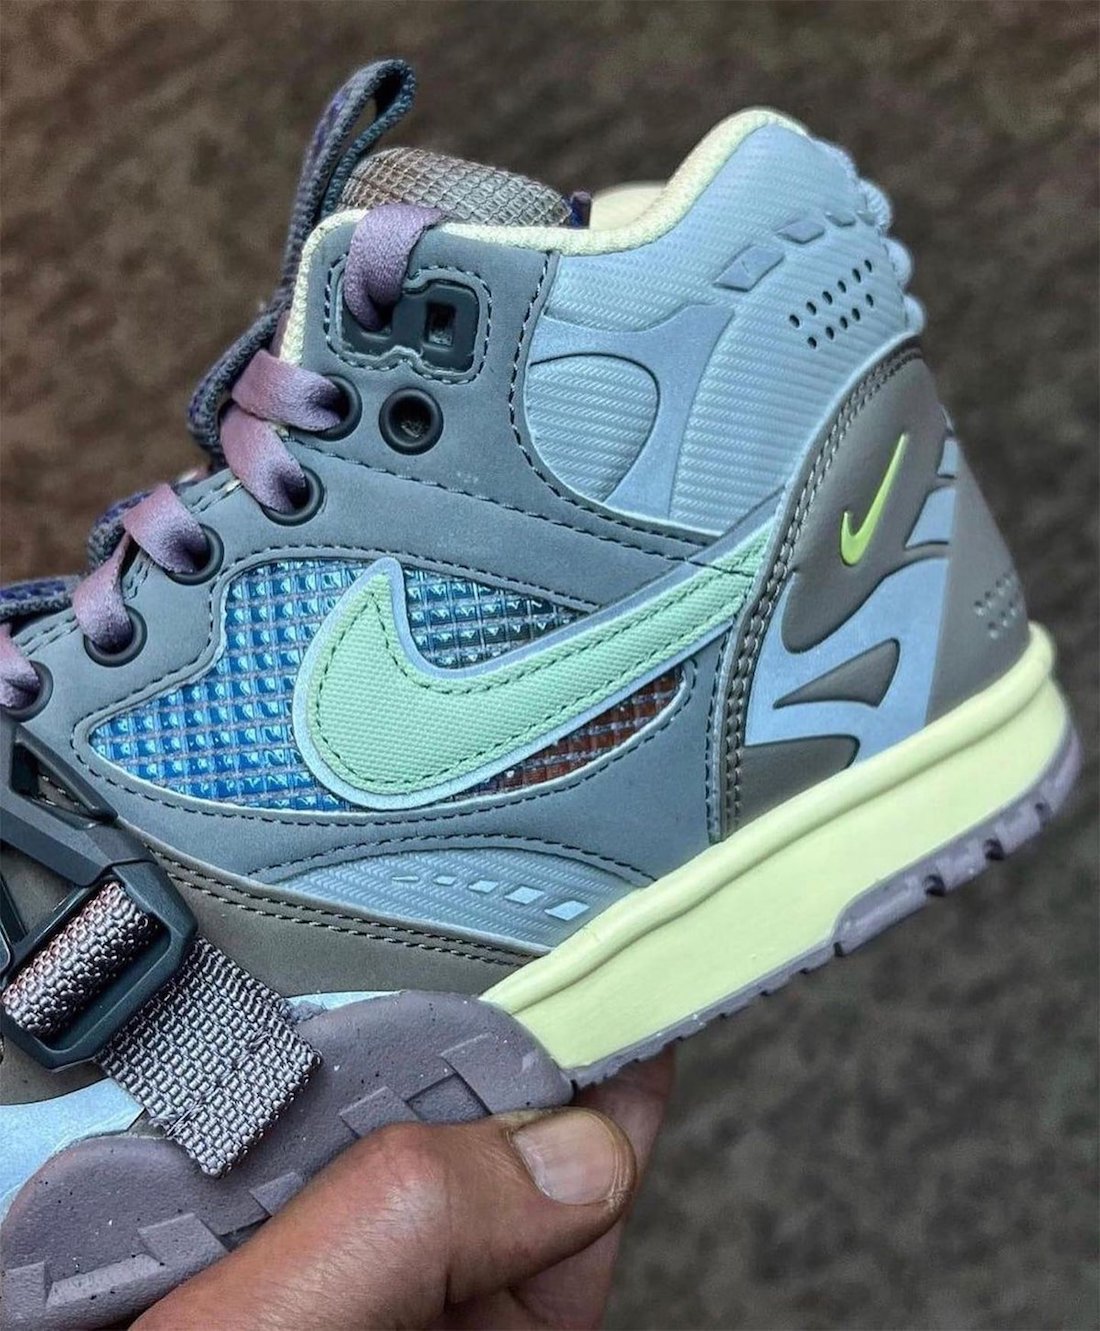 Nike Air Trainer 1 Utility Light Smoke Grey Honeydew Particle Grey DH7338-002 Release Date Info